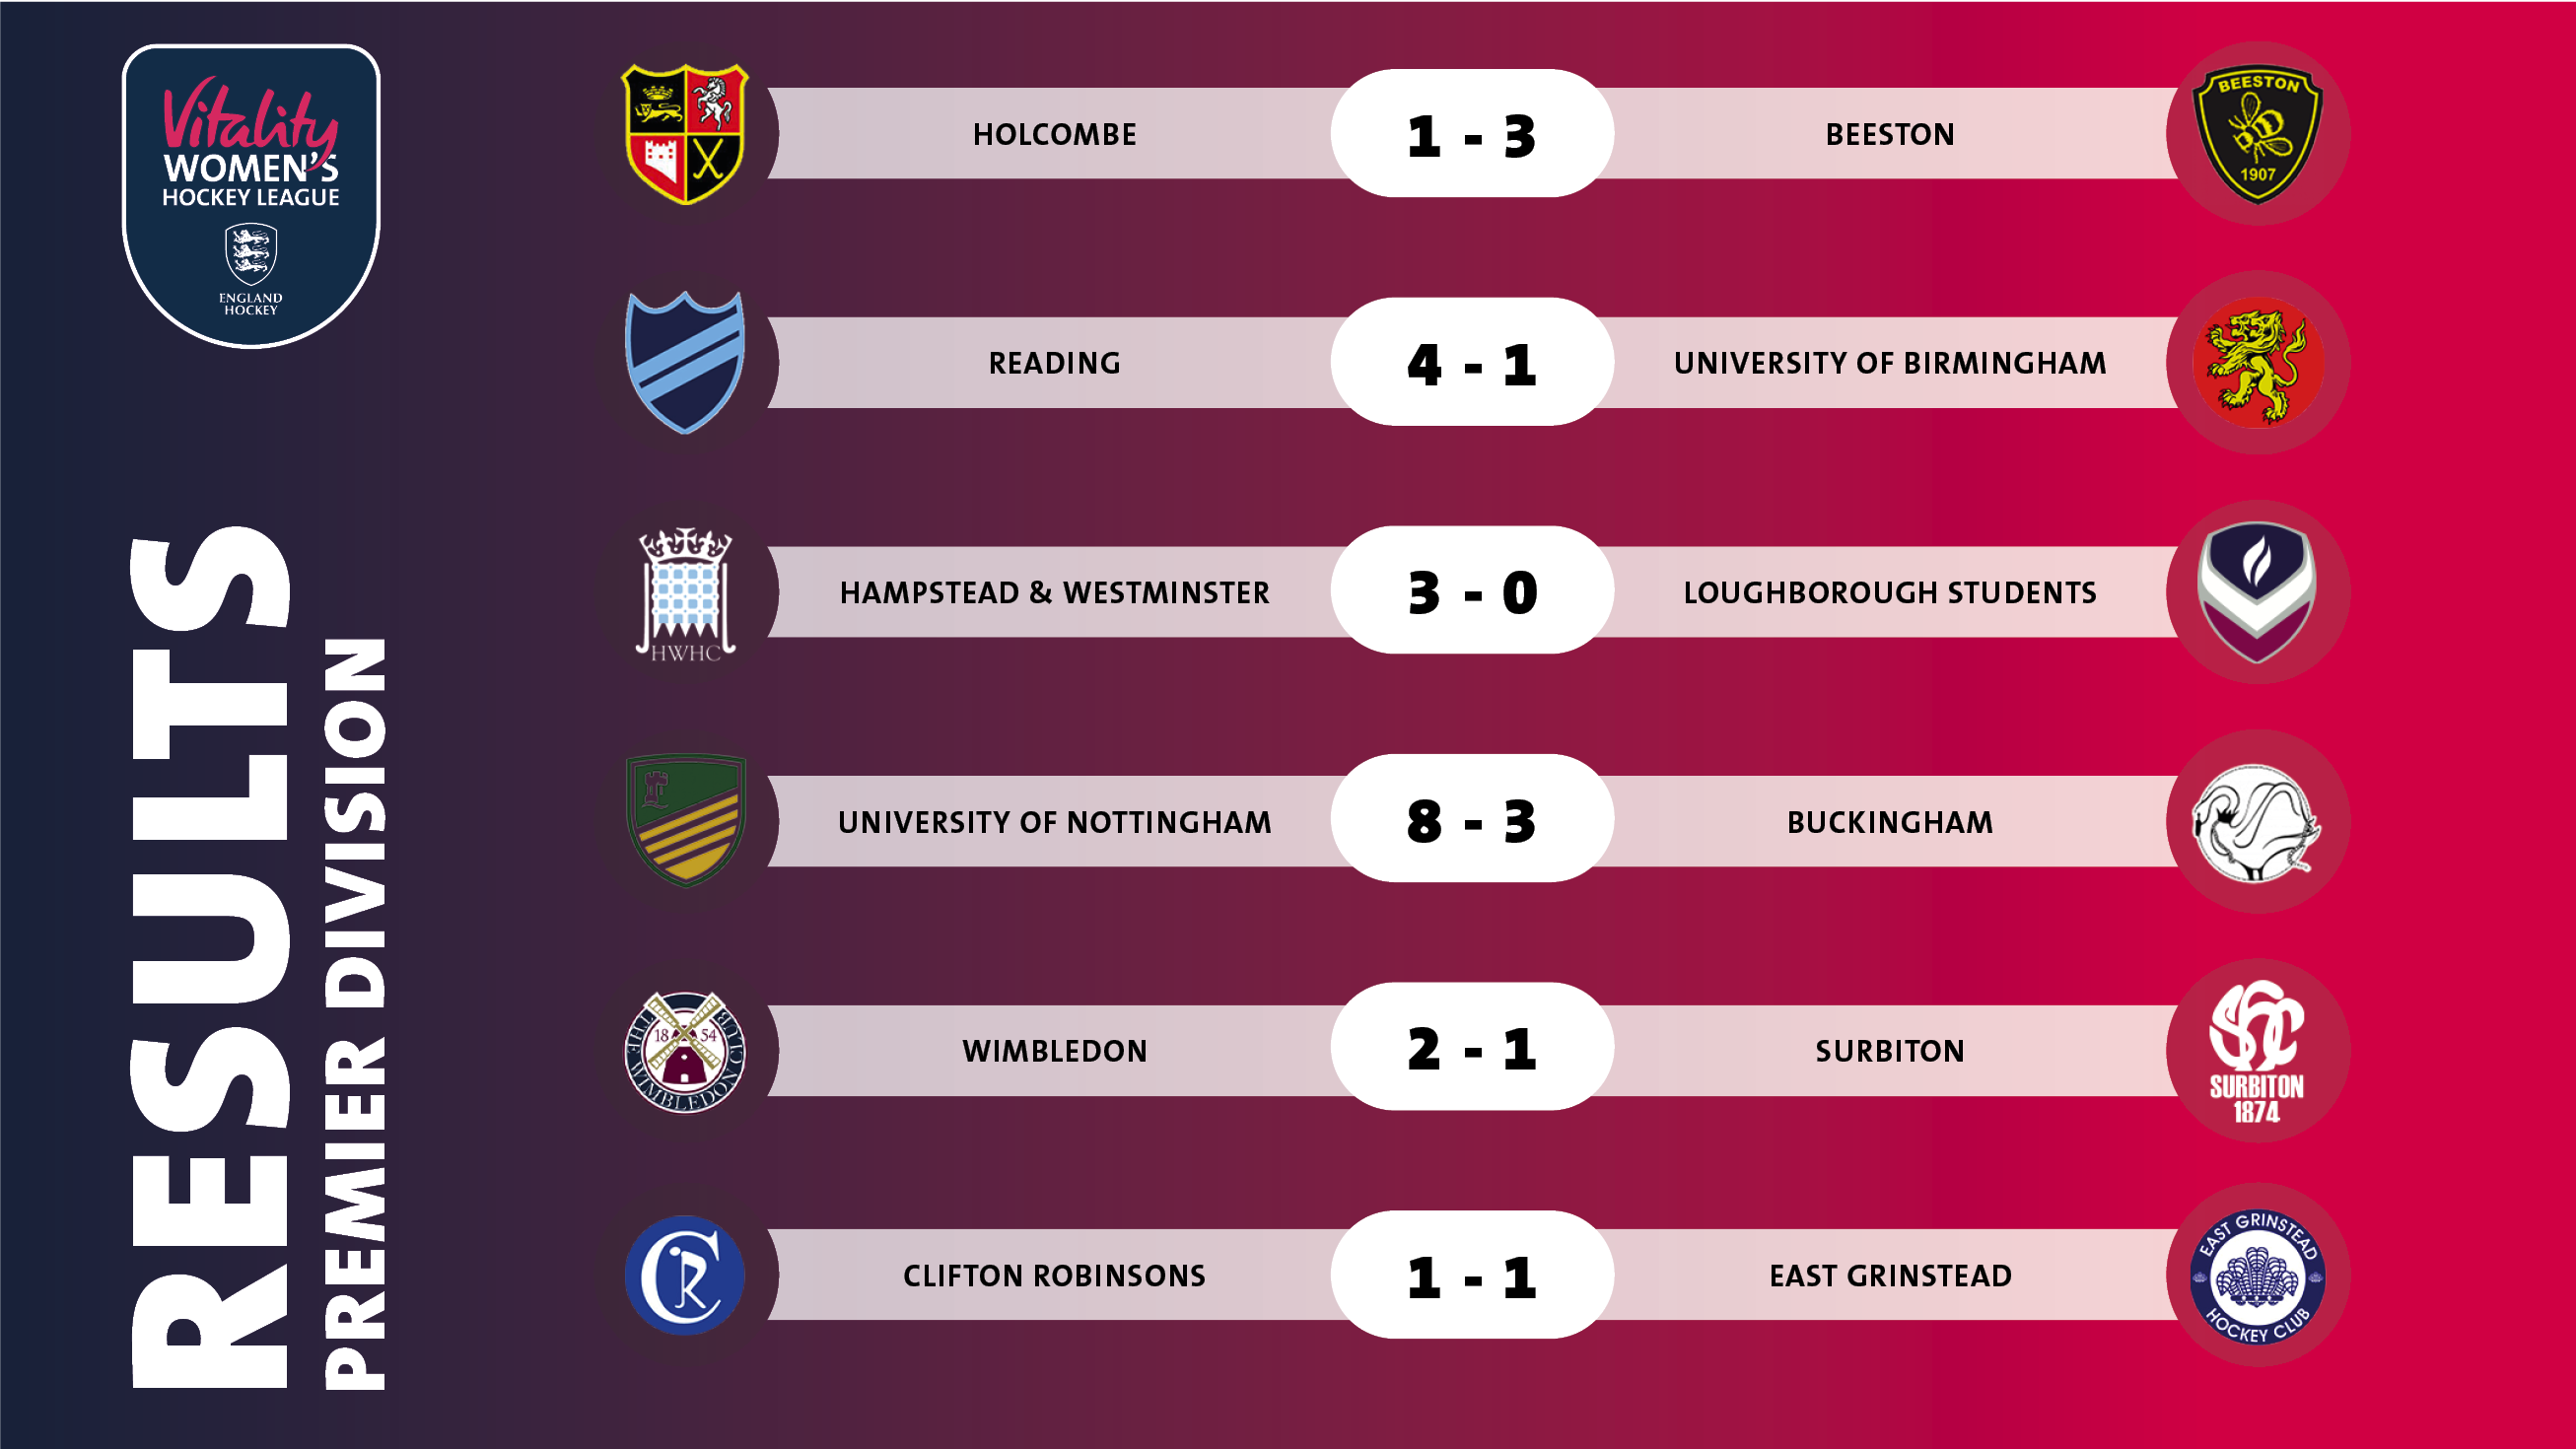 VWHL%20Wk5%20ResultsV1 - England: Vitality Women's Hockey League Week 5 2022 Review - Week 5 of the Vitality Women's Hockey League produced a few surprise results and outstanding performances up and down the country as the Premier Division entertained once again.